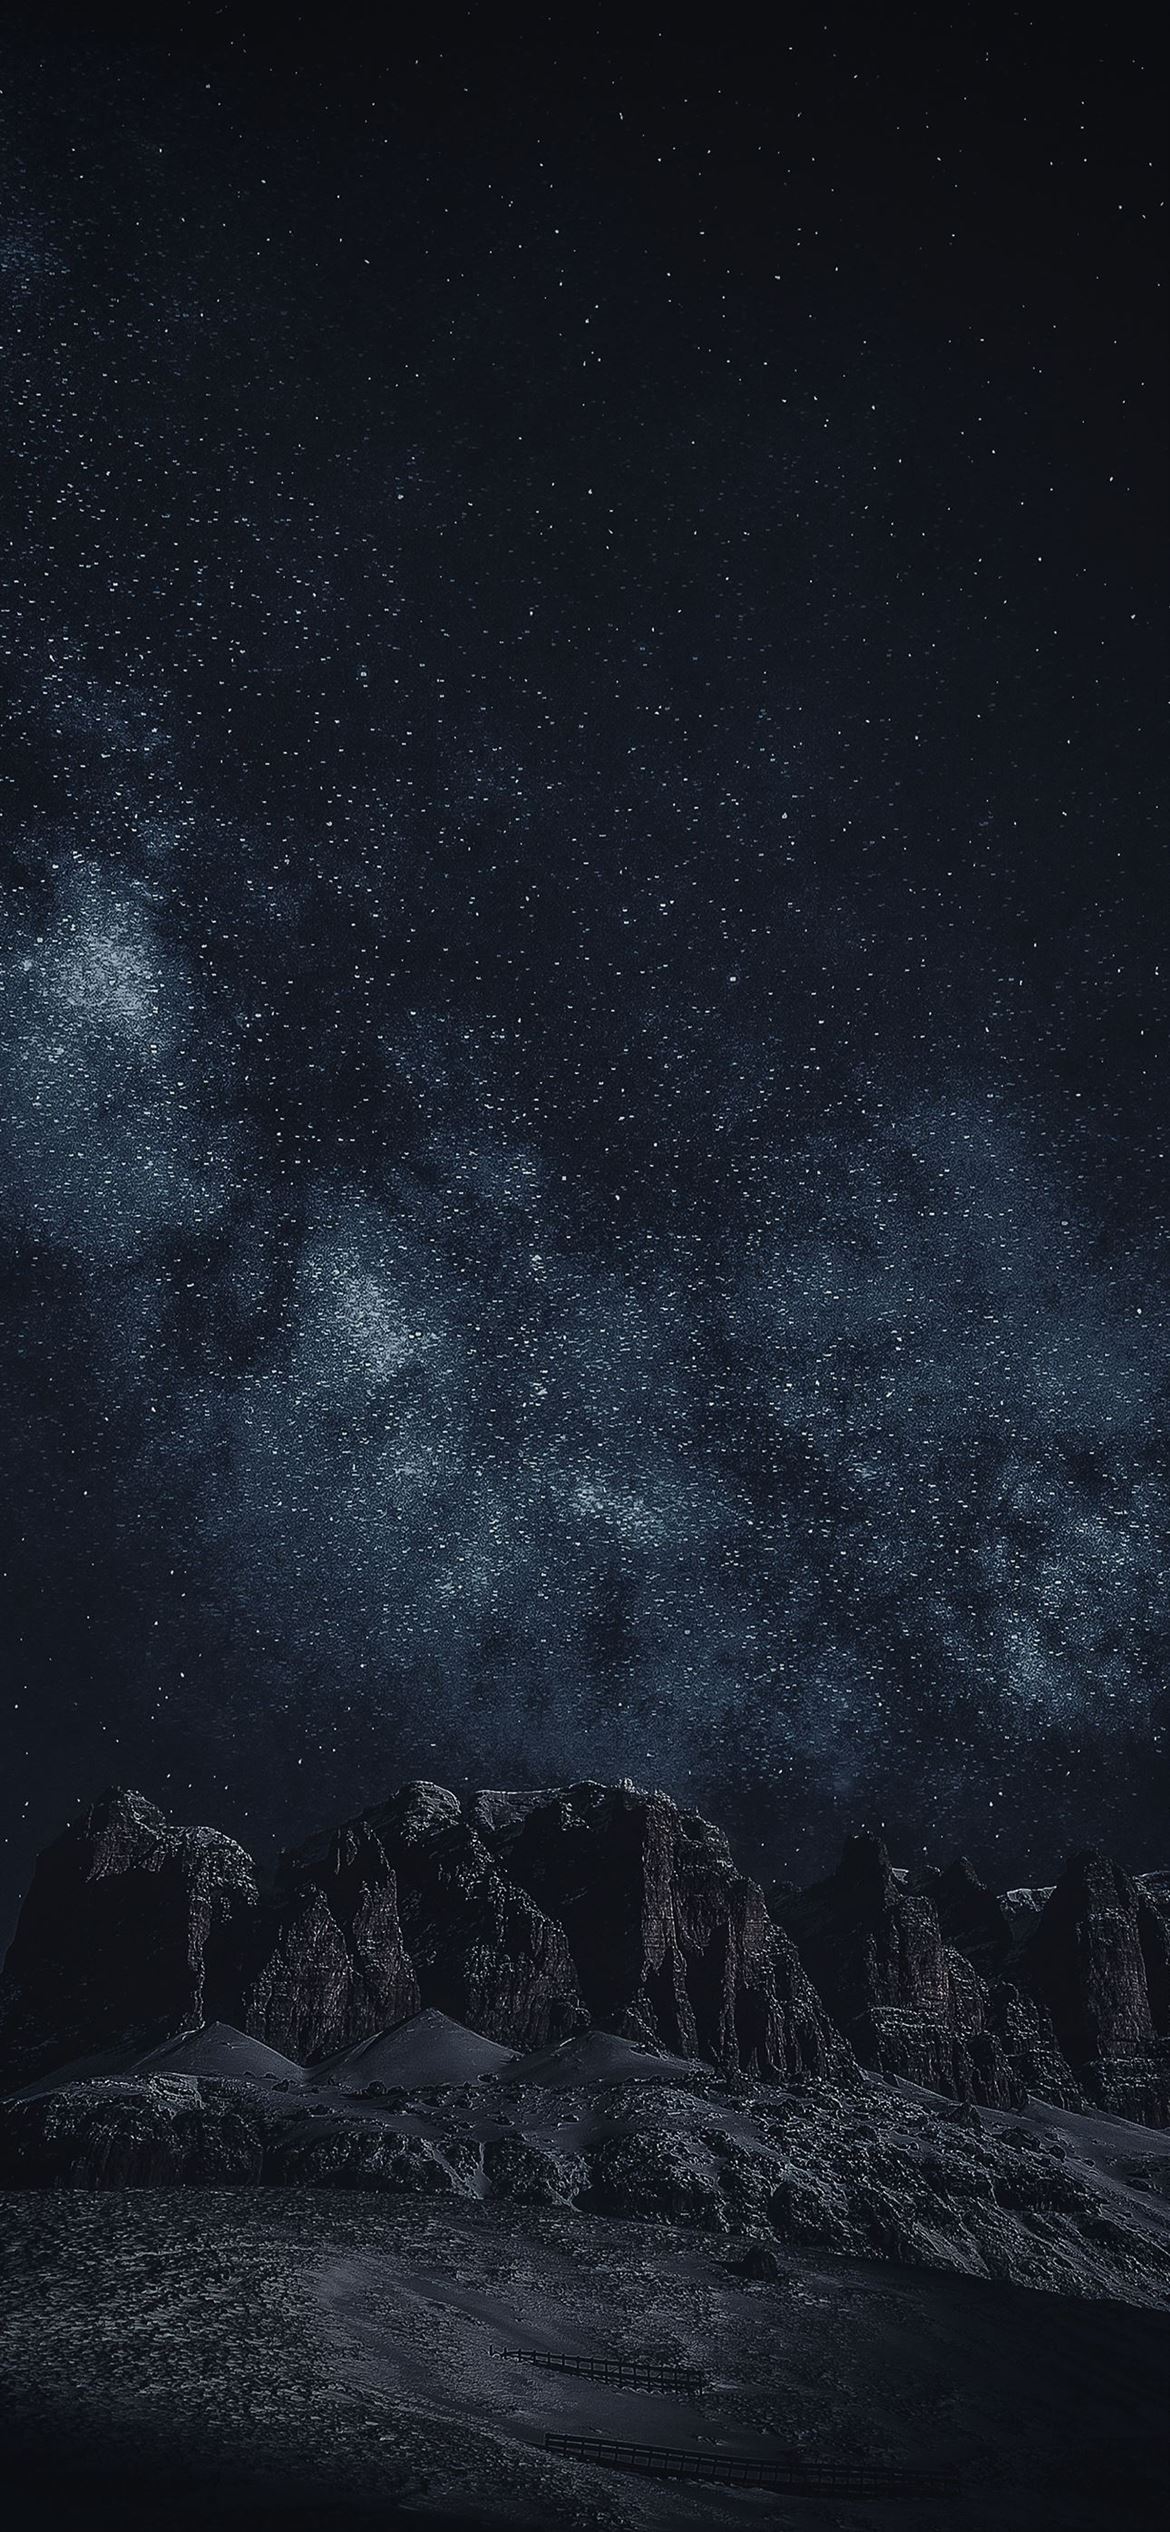 Space Earth and Moon Live Wallpaper - free download